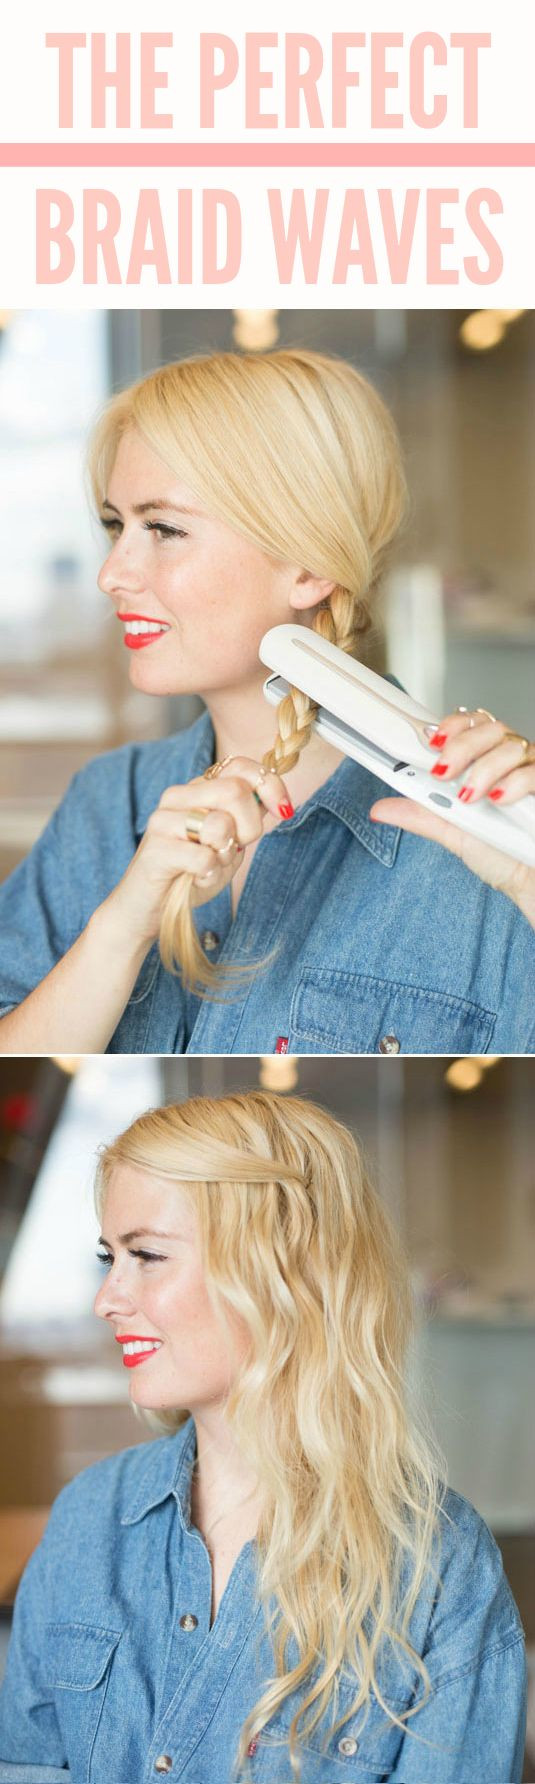 15 Super-Simple Ways to Make Doing Your Hair Incre...